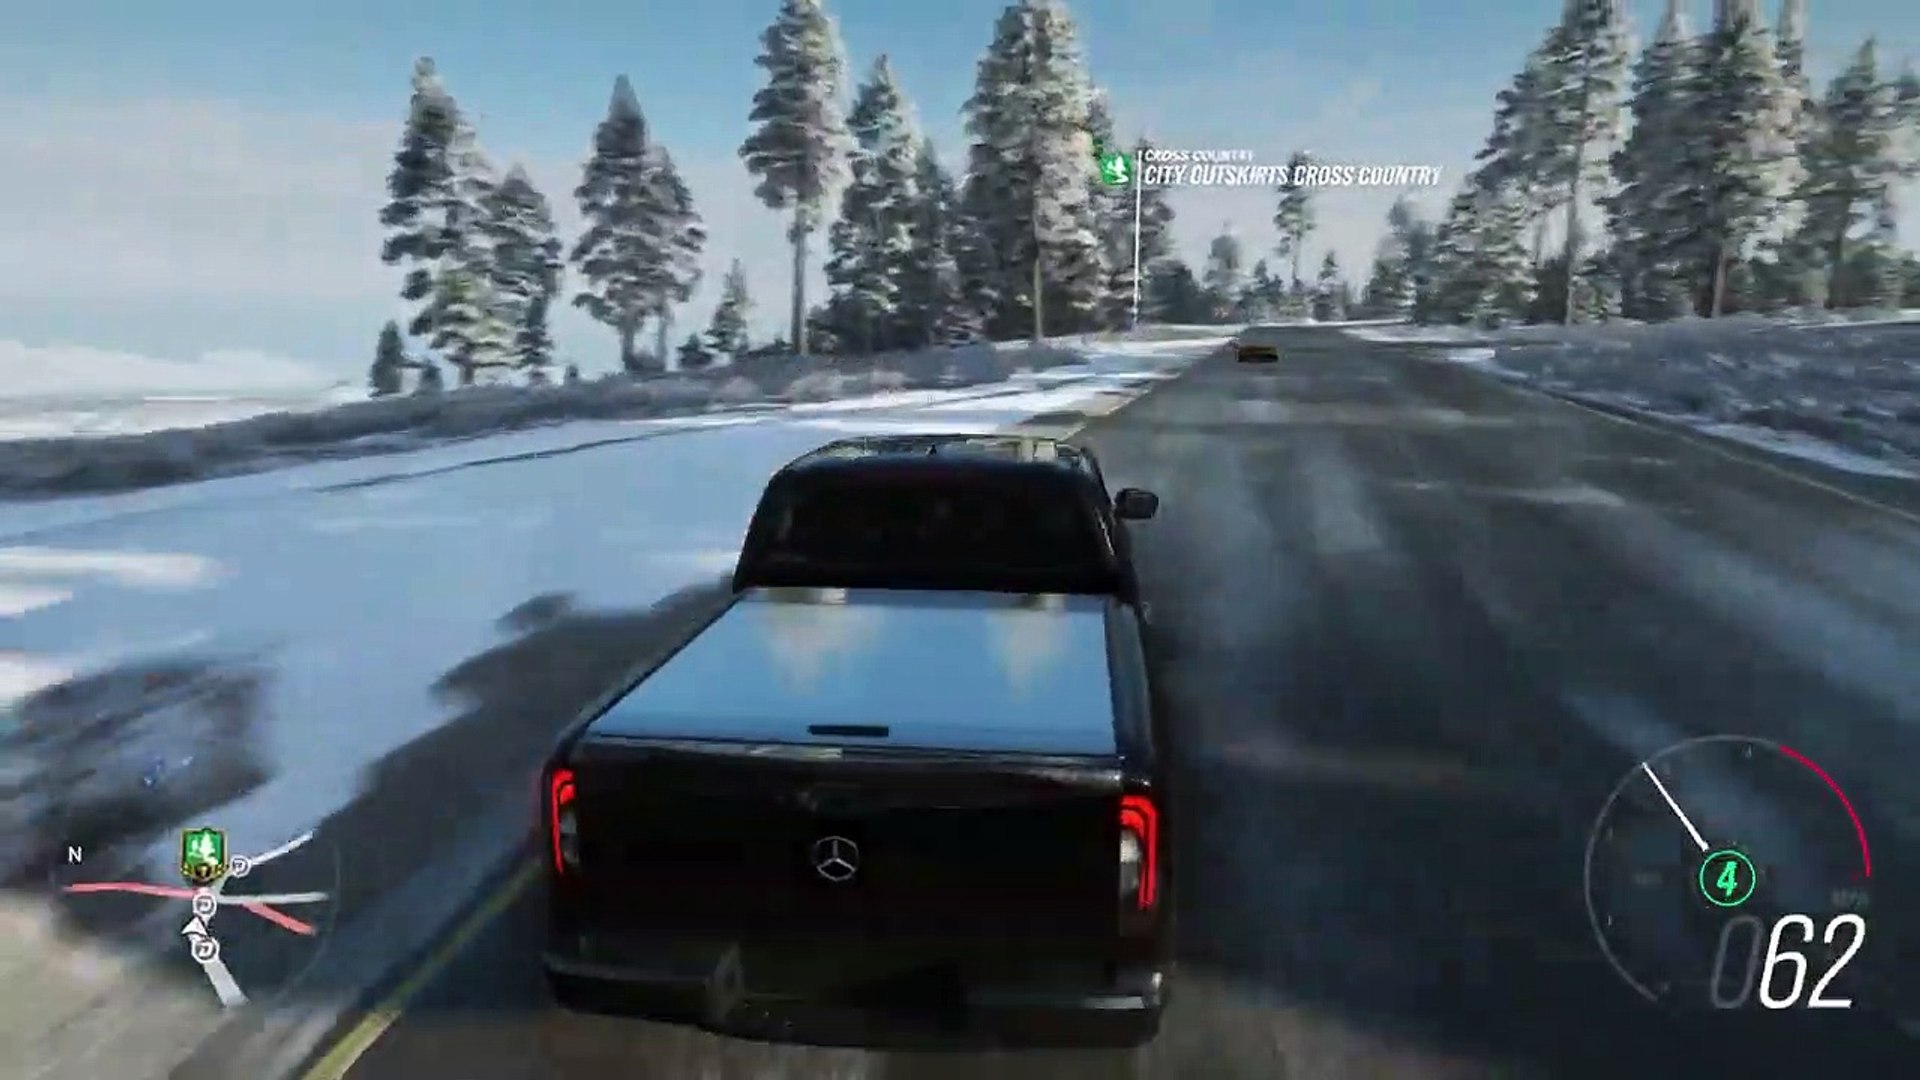 Forza Horizon 4 - 630HP BRABUS MERCEDES-BENZ X-CLASS - Test drive in snow -  video Dailymotion